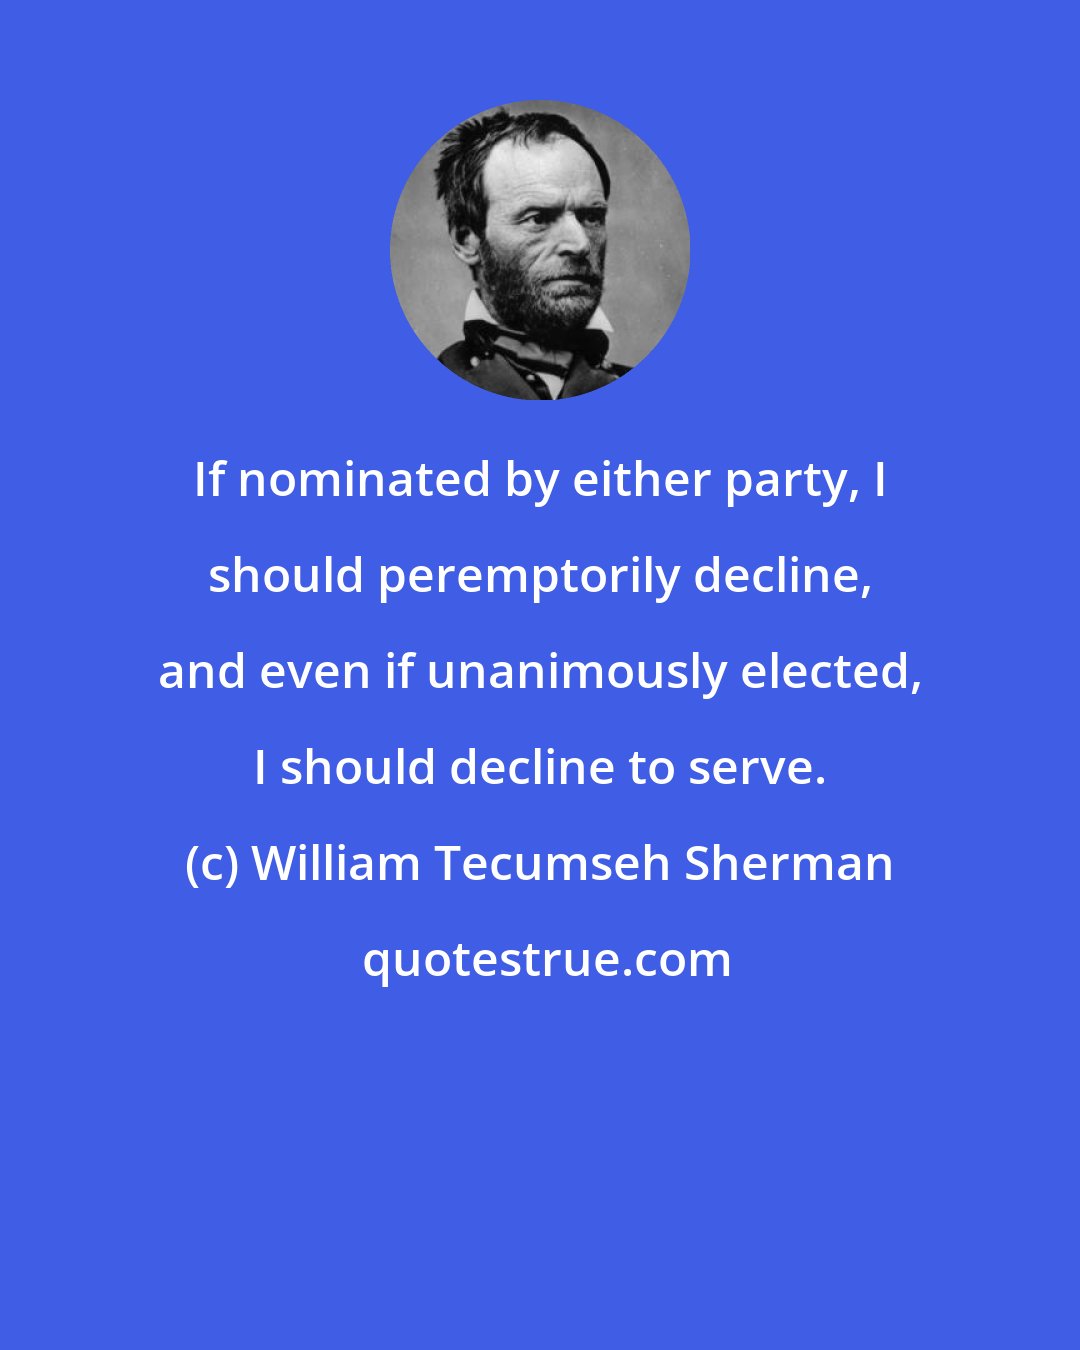 William Tecumseh Sherman: If nominated by either party, I should peremptorily decline, and even if unanimously elected, I should decline to serve.